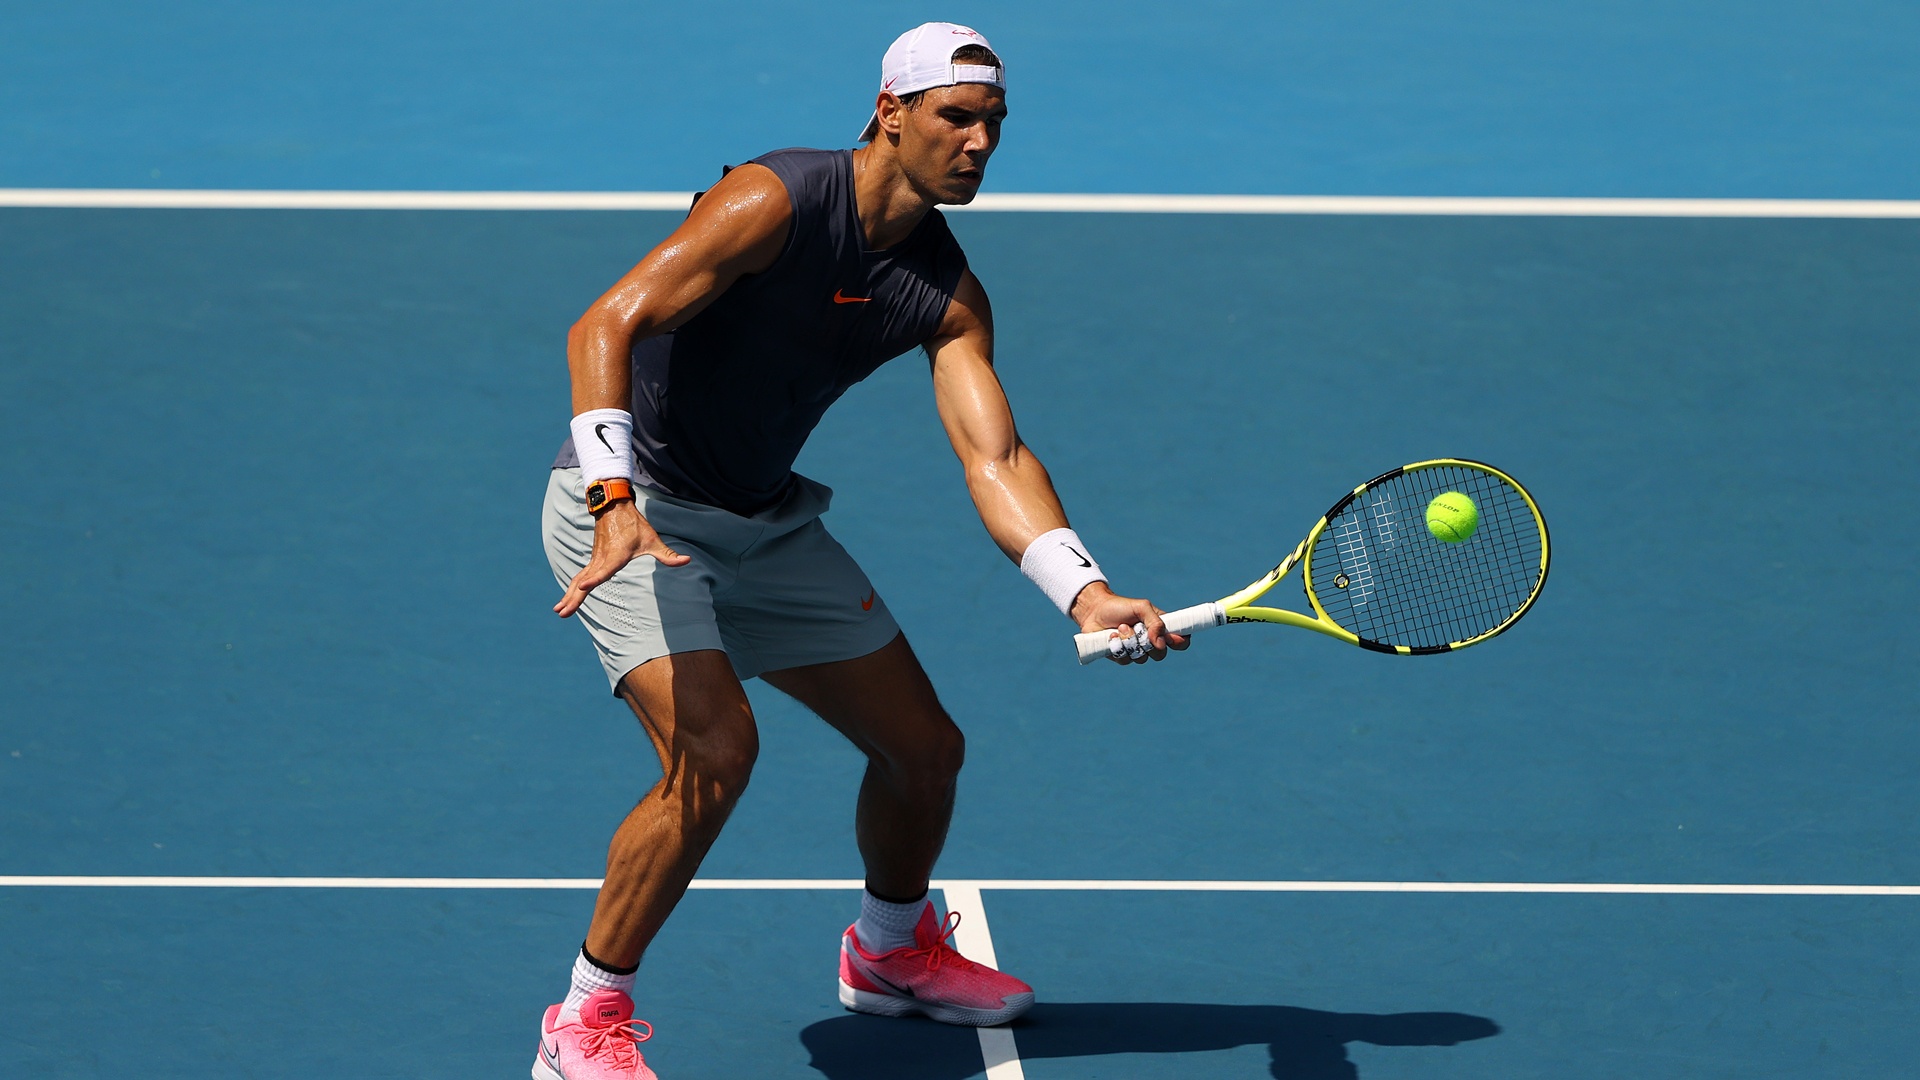 Australian Open 2020 Rafael Nadal results and form ahead of first-round match with Hugo Dellien